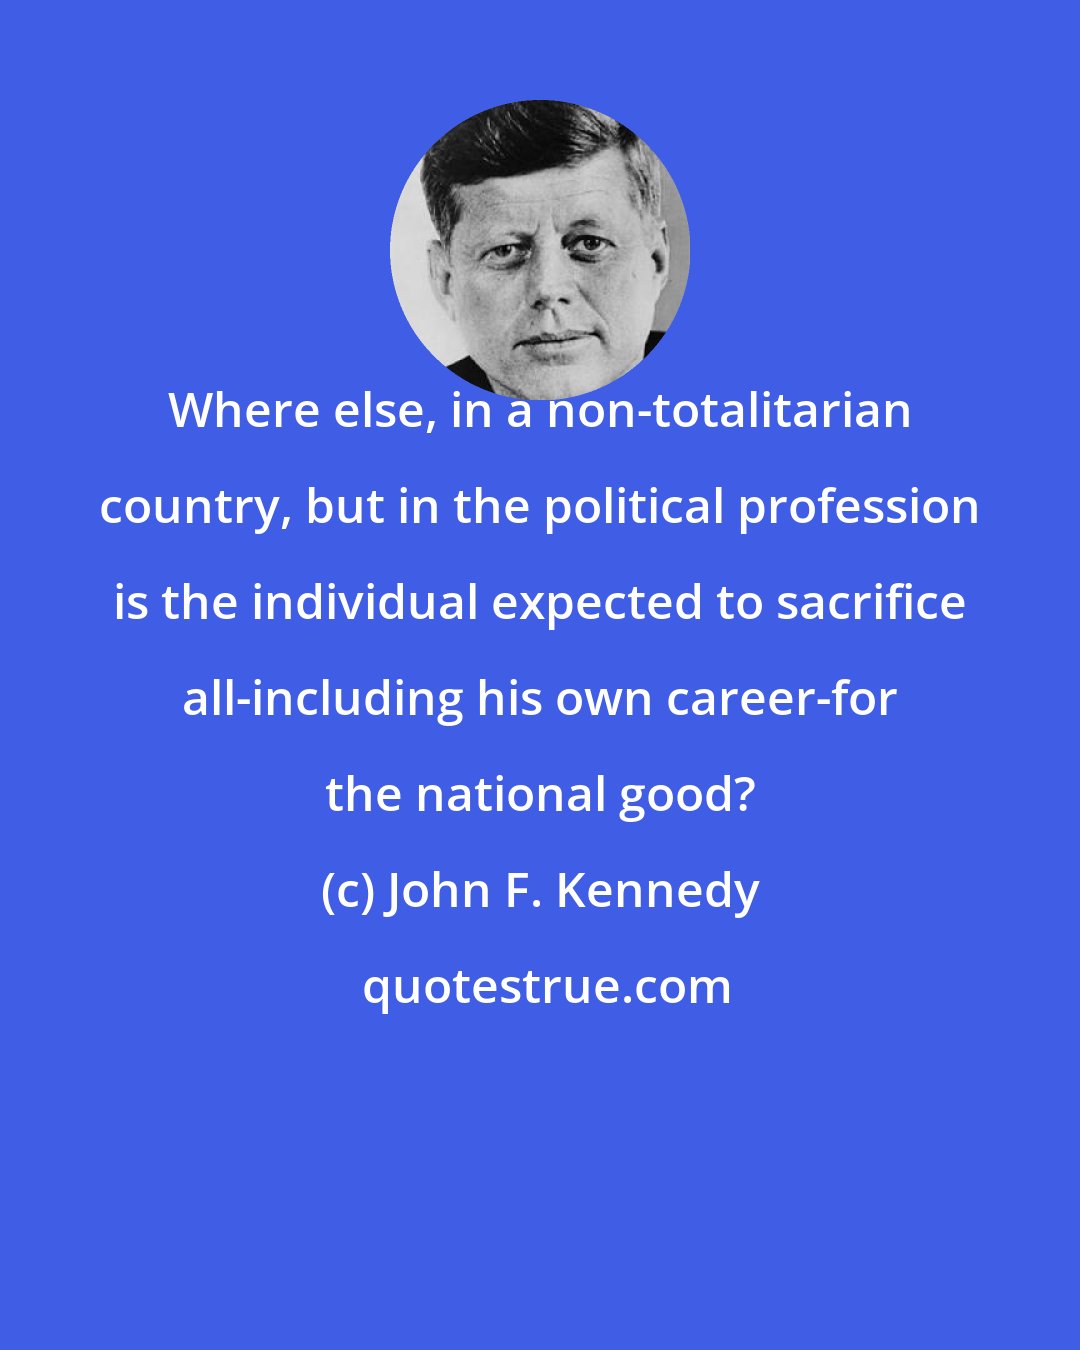 John F. Kennedy: Where else, in a non-totalitarian country, but in the political profession is the individual expected to sacrifice all-including his own career-for the national good?